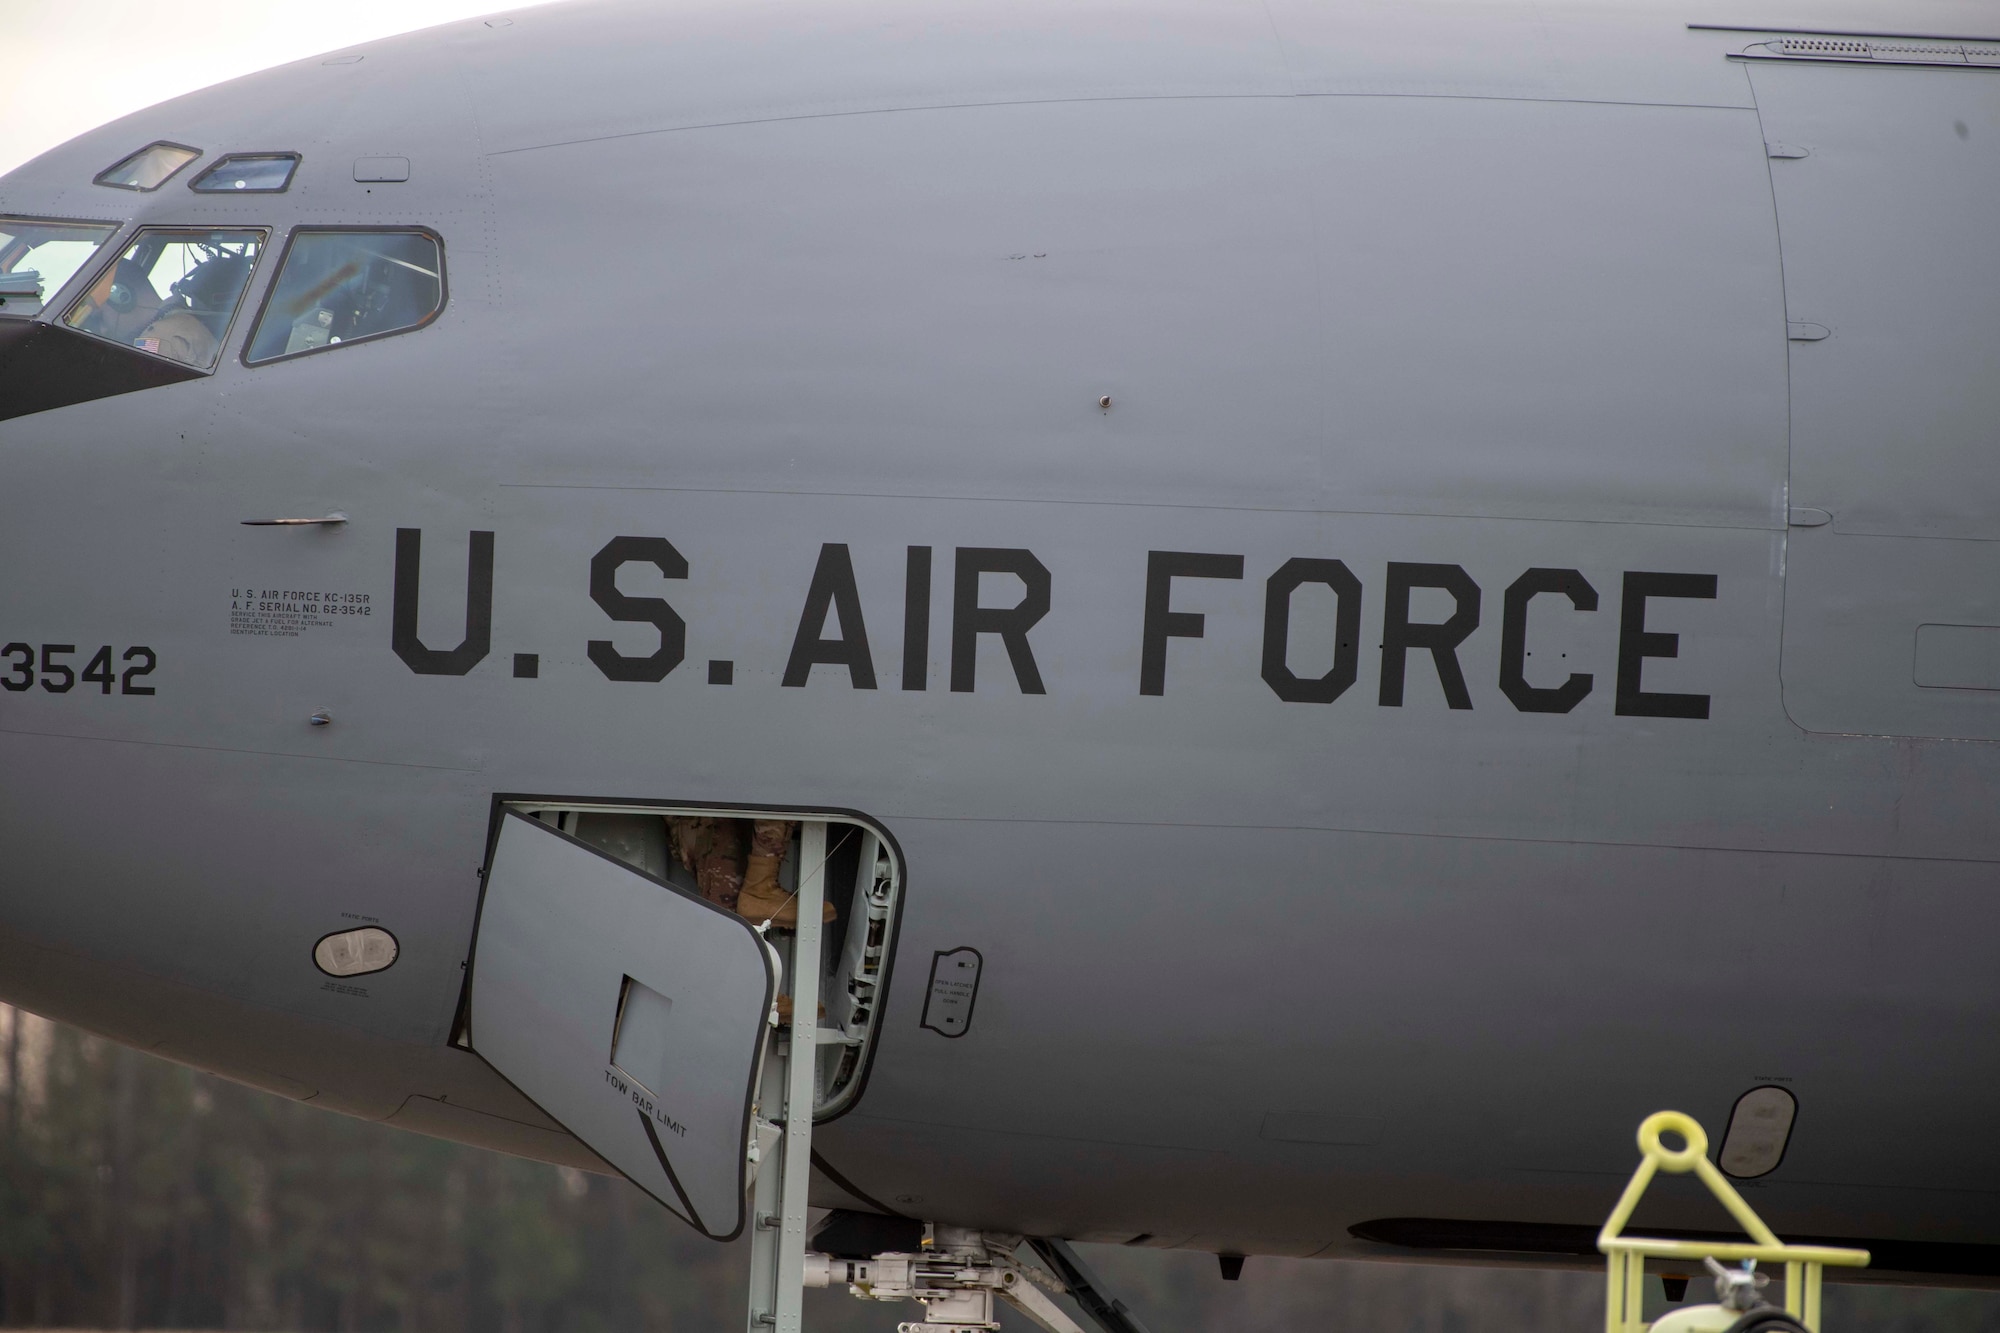 U.S. Air Force Staff Sgt. Jose A. Reyes, a 911th Air Refueling Squadron (ARS) dedicated crew chief, boards the aircraft upon completion of pre-flight checks before takeoff from Seymour Johnson Air Force Base, North Carolina, Dec. 12, 2019. This marks the last boots off the ground before the 911 ARS depart for their final mission on a KC-135 Stratotanker. (U.S. Air Force photo by Staff Sgt. Mary McKnight)